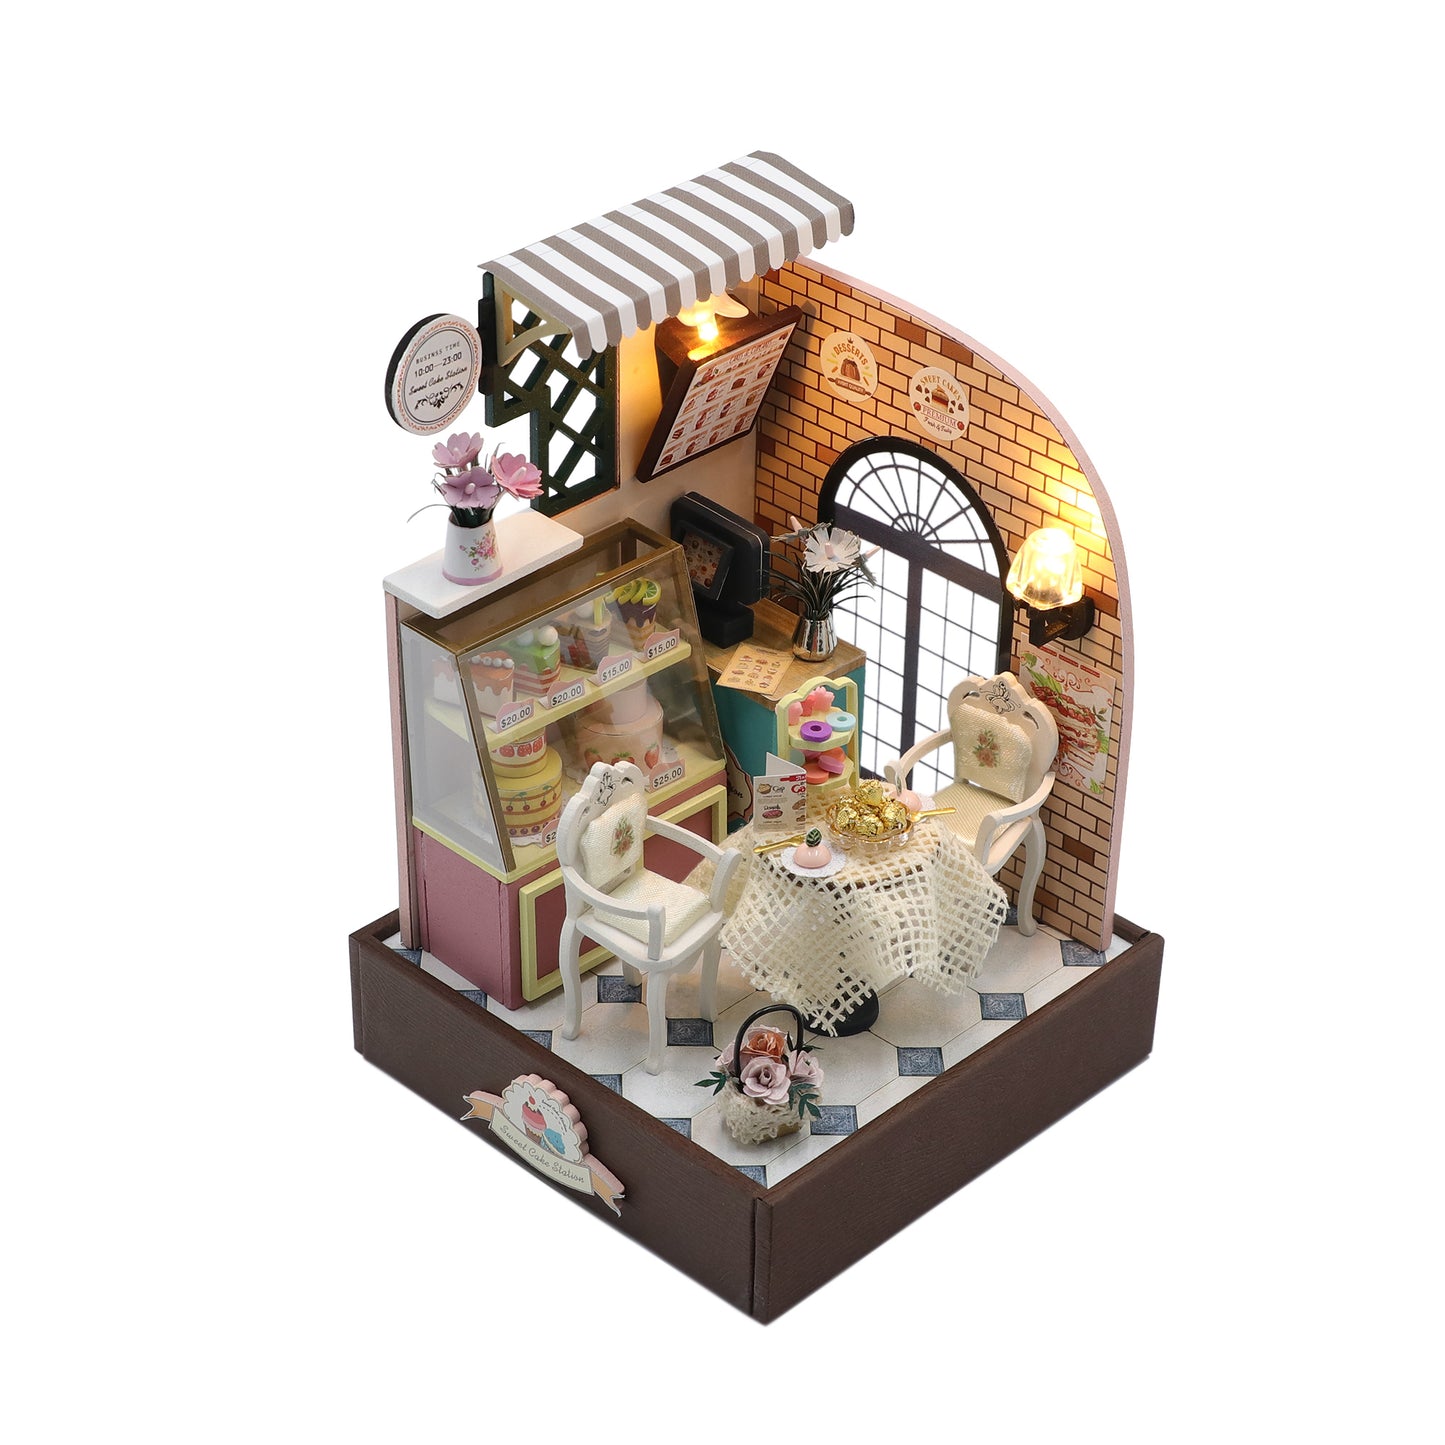 DIY "Sweet Cake Station" S2201 Dollhouse Furniture Wooden Miniature Dollhouse w/ LEDs and Dust Proof Cover Toy Kits Fun Crafts